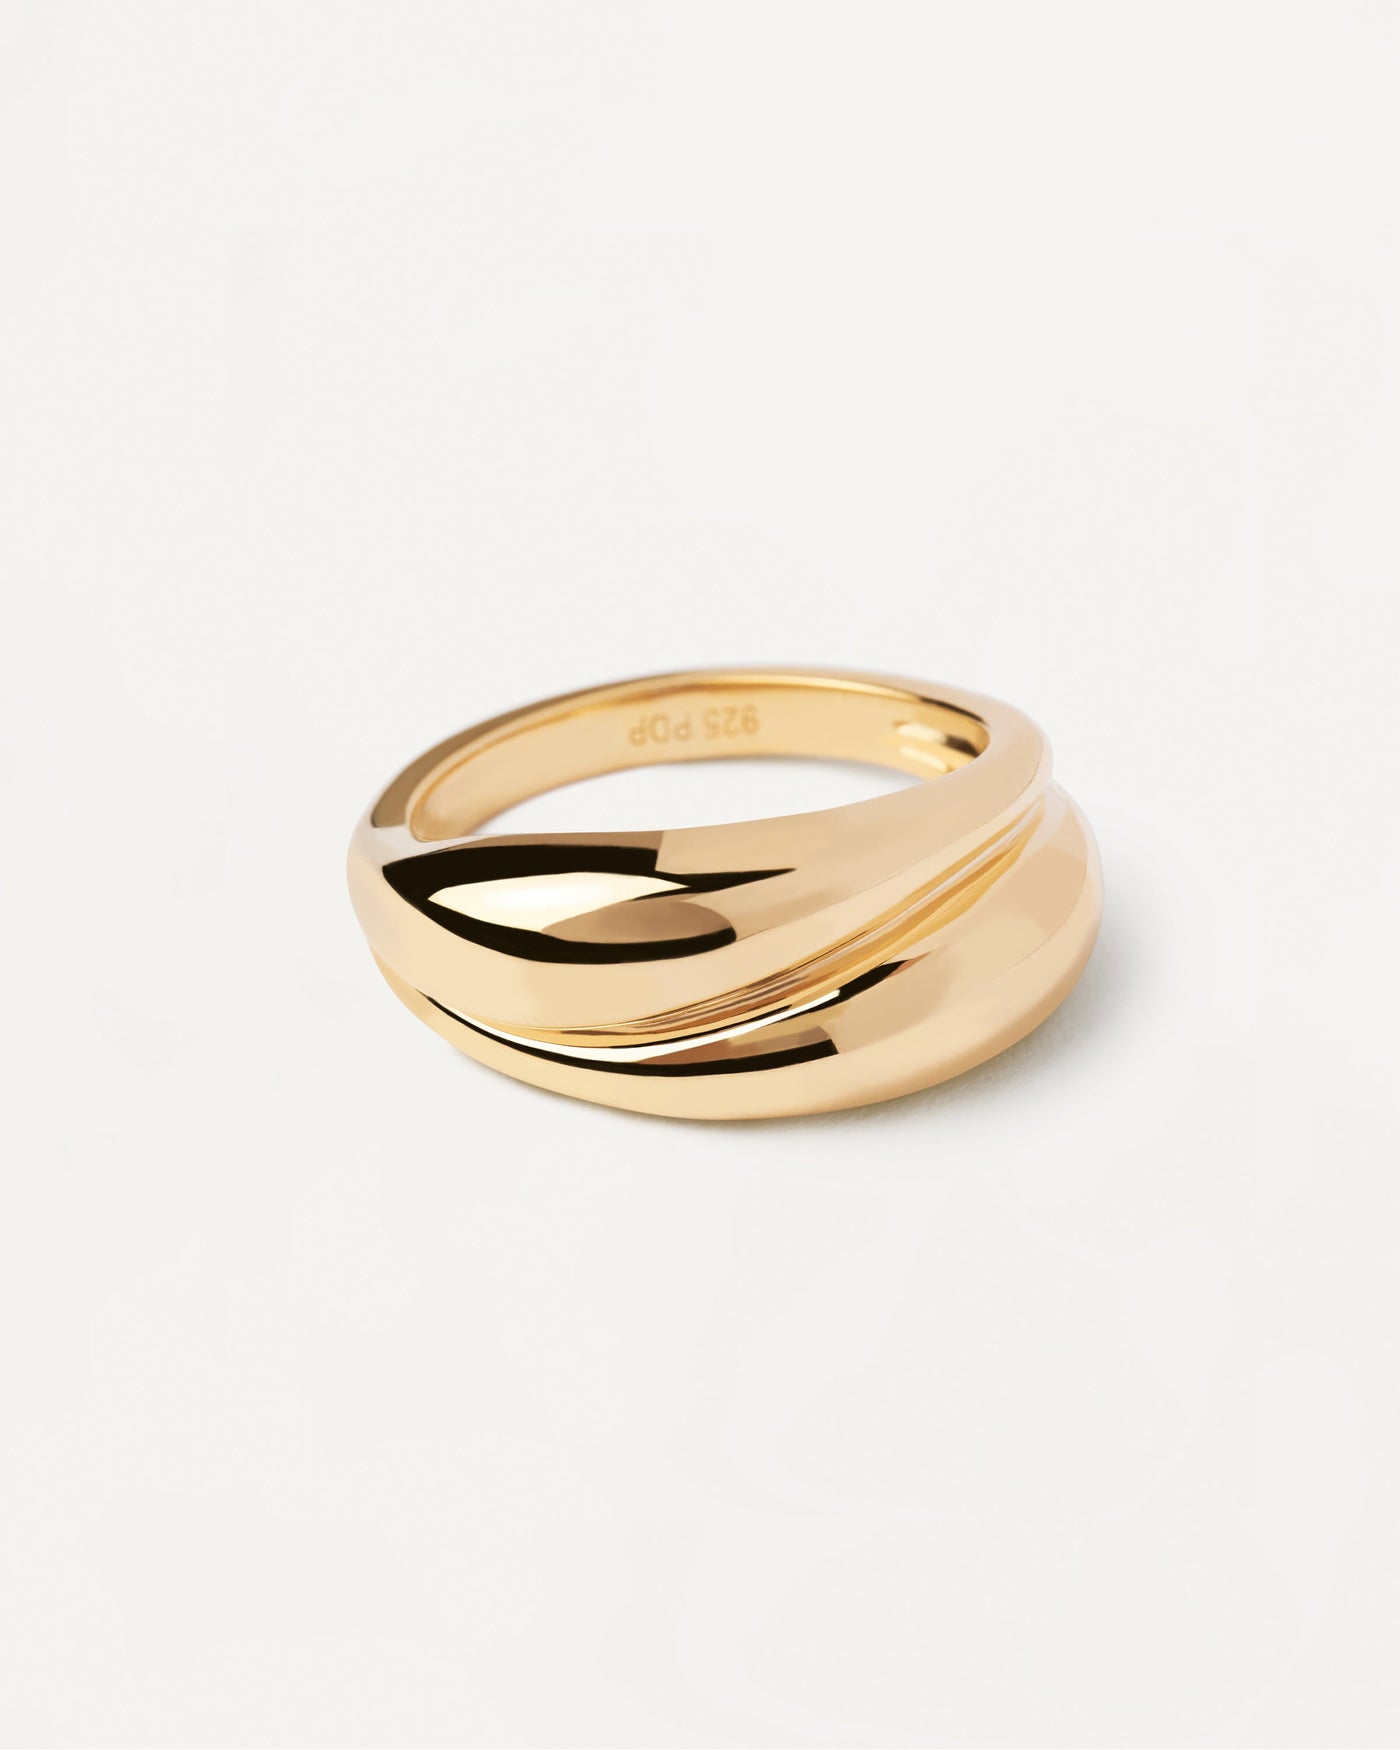 2023 Selection | Desire Ring. Bold curvy ring in gold-plated sterling silver. Get the latest arrival from PDPAOLA. Place your order safely and get this Best Seller. Free Shipping.